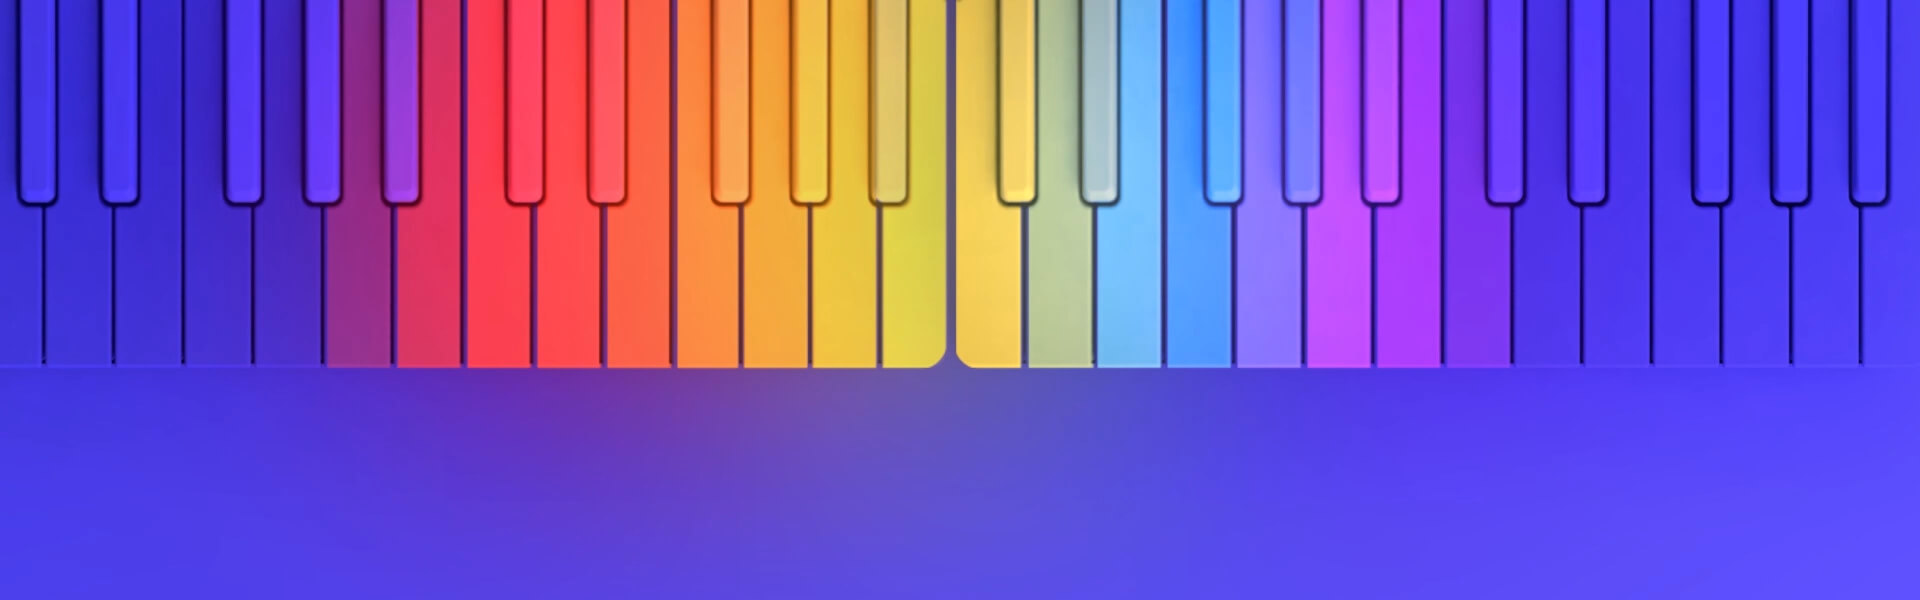 Rainbow-bright Lumi teaches piano with video games - CNET